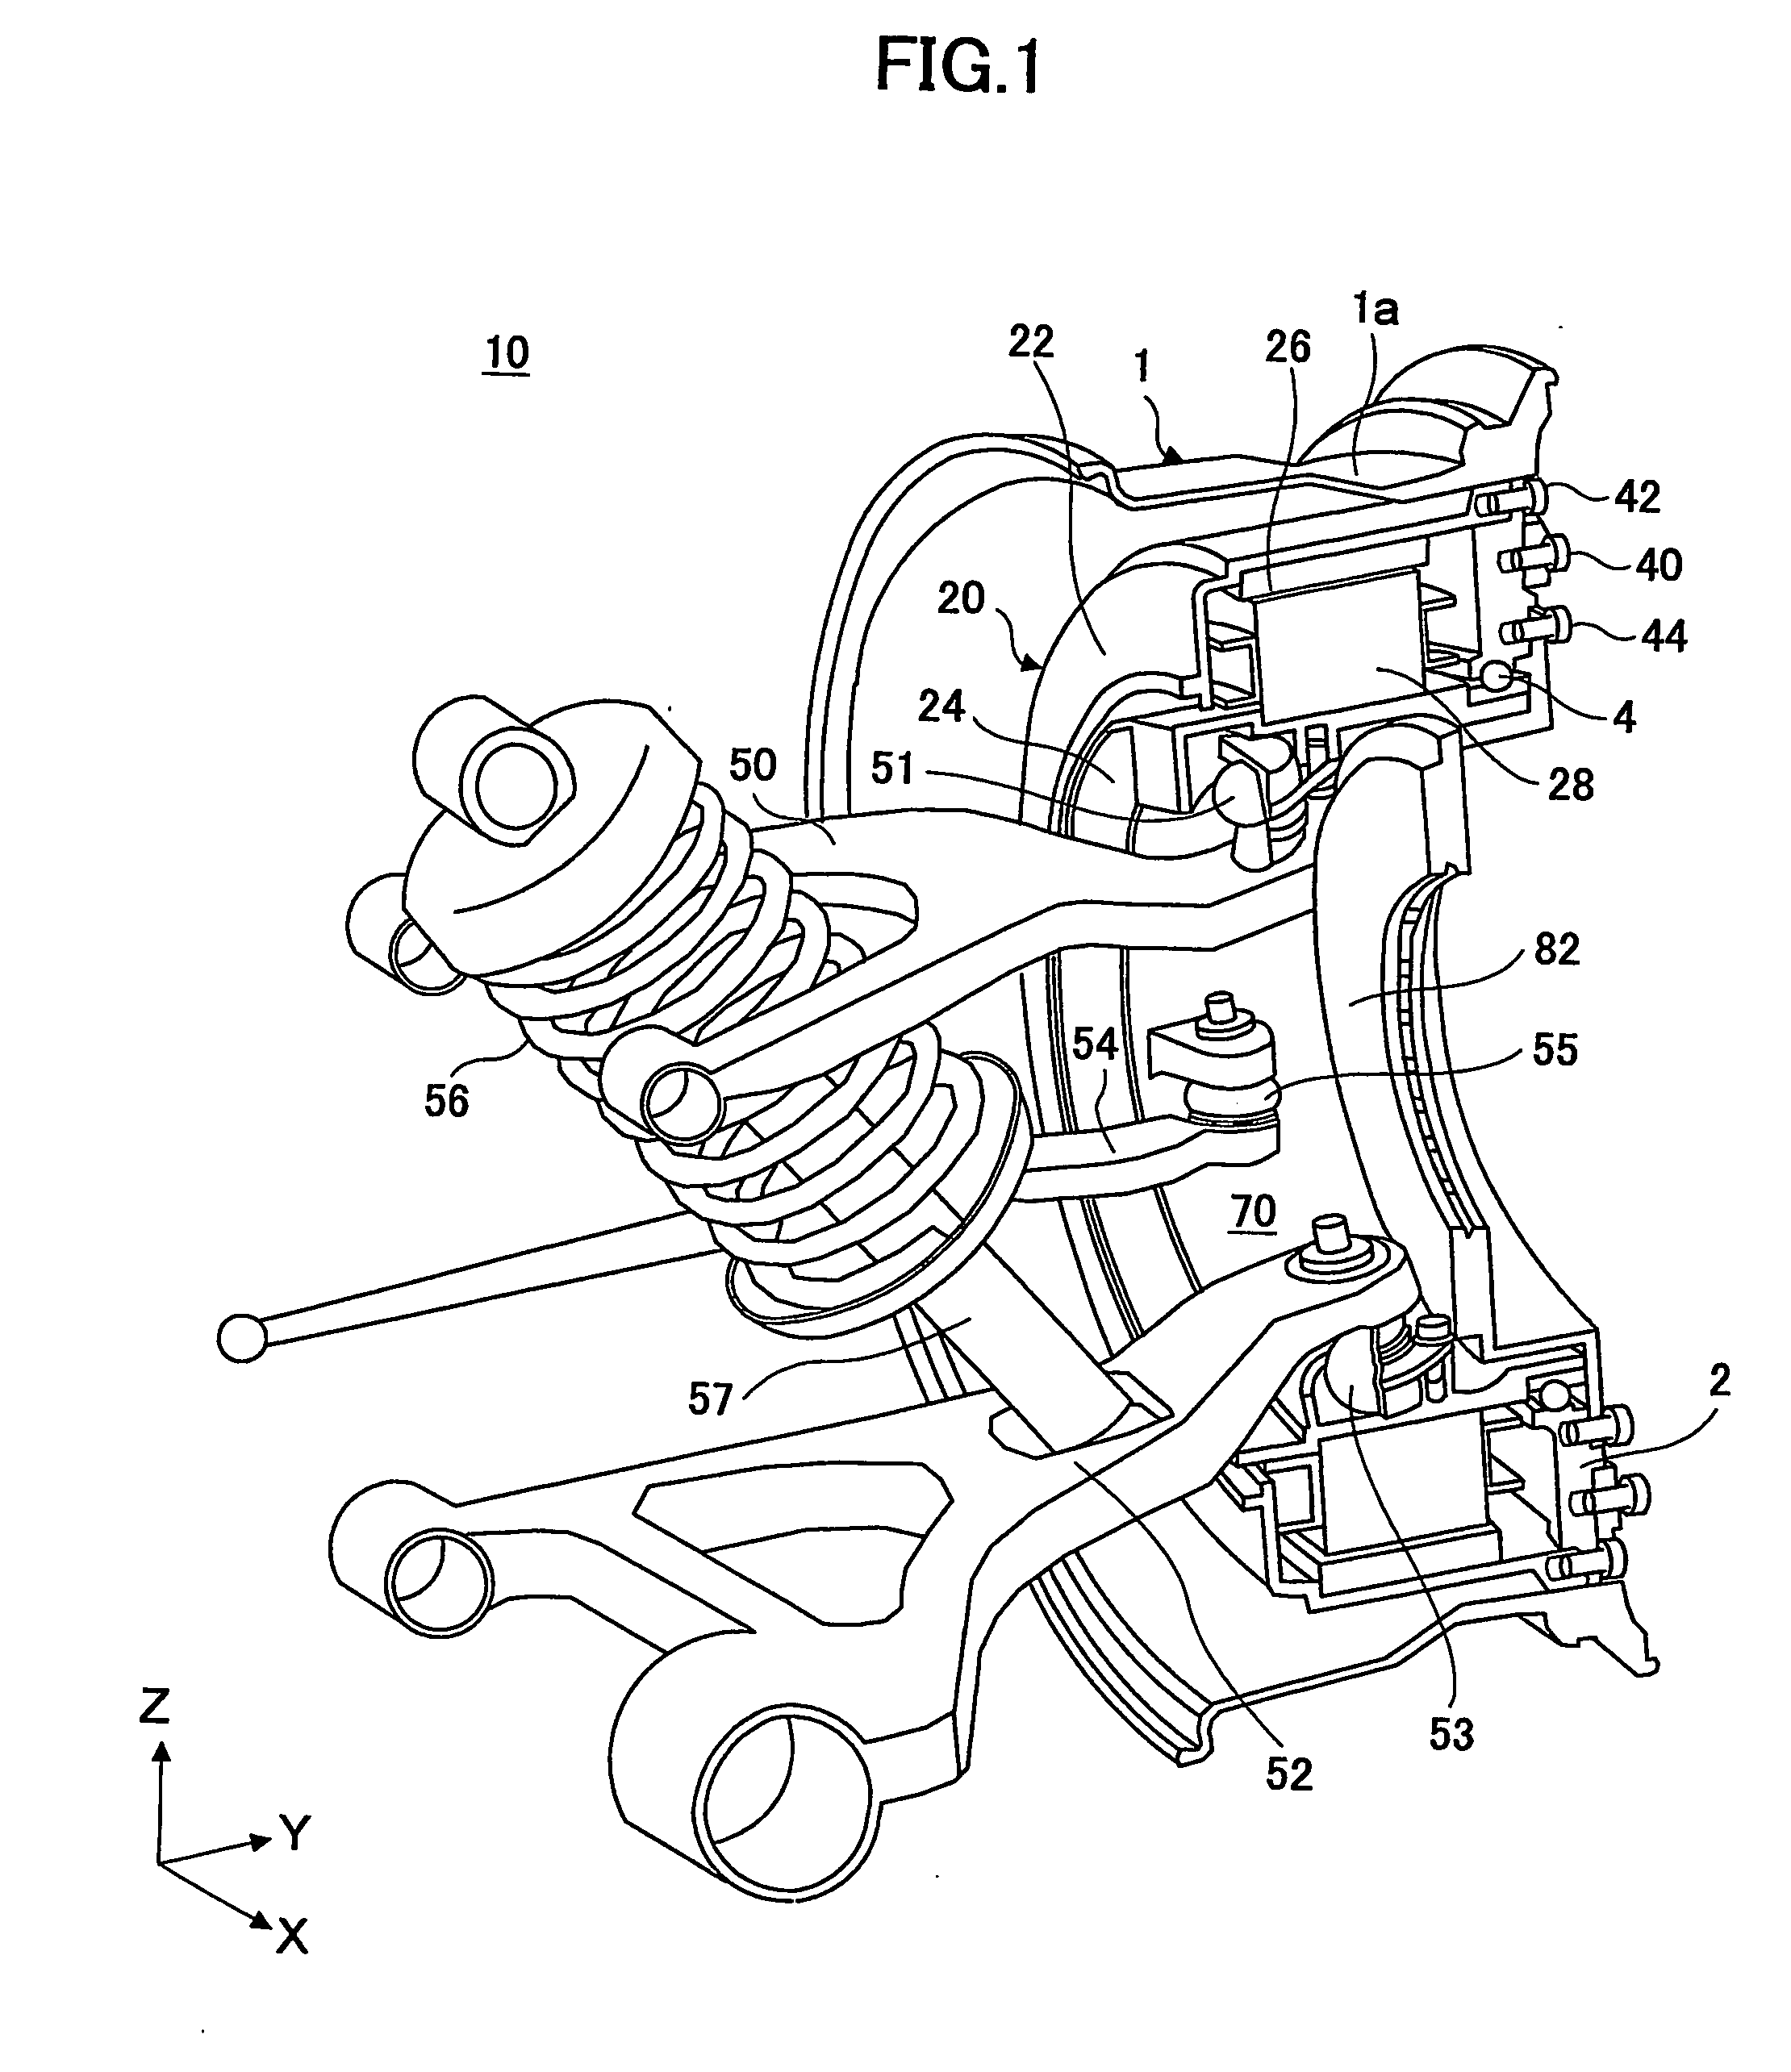 Suspension system for suspending a wheel having a motor therein